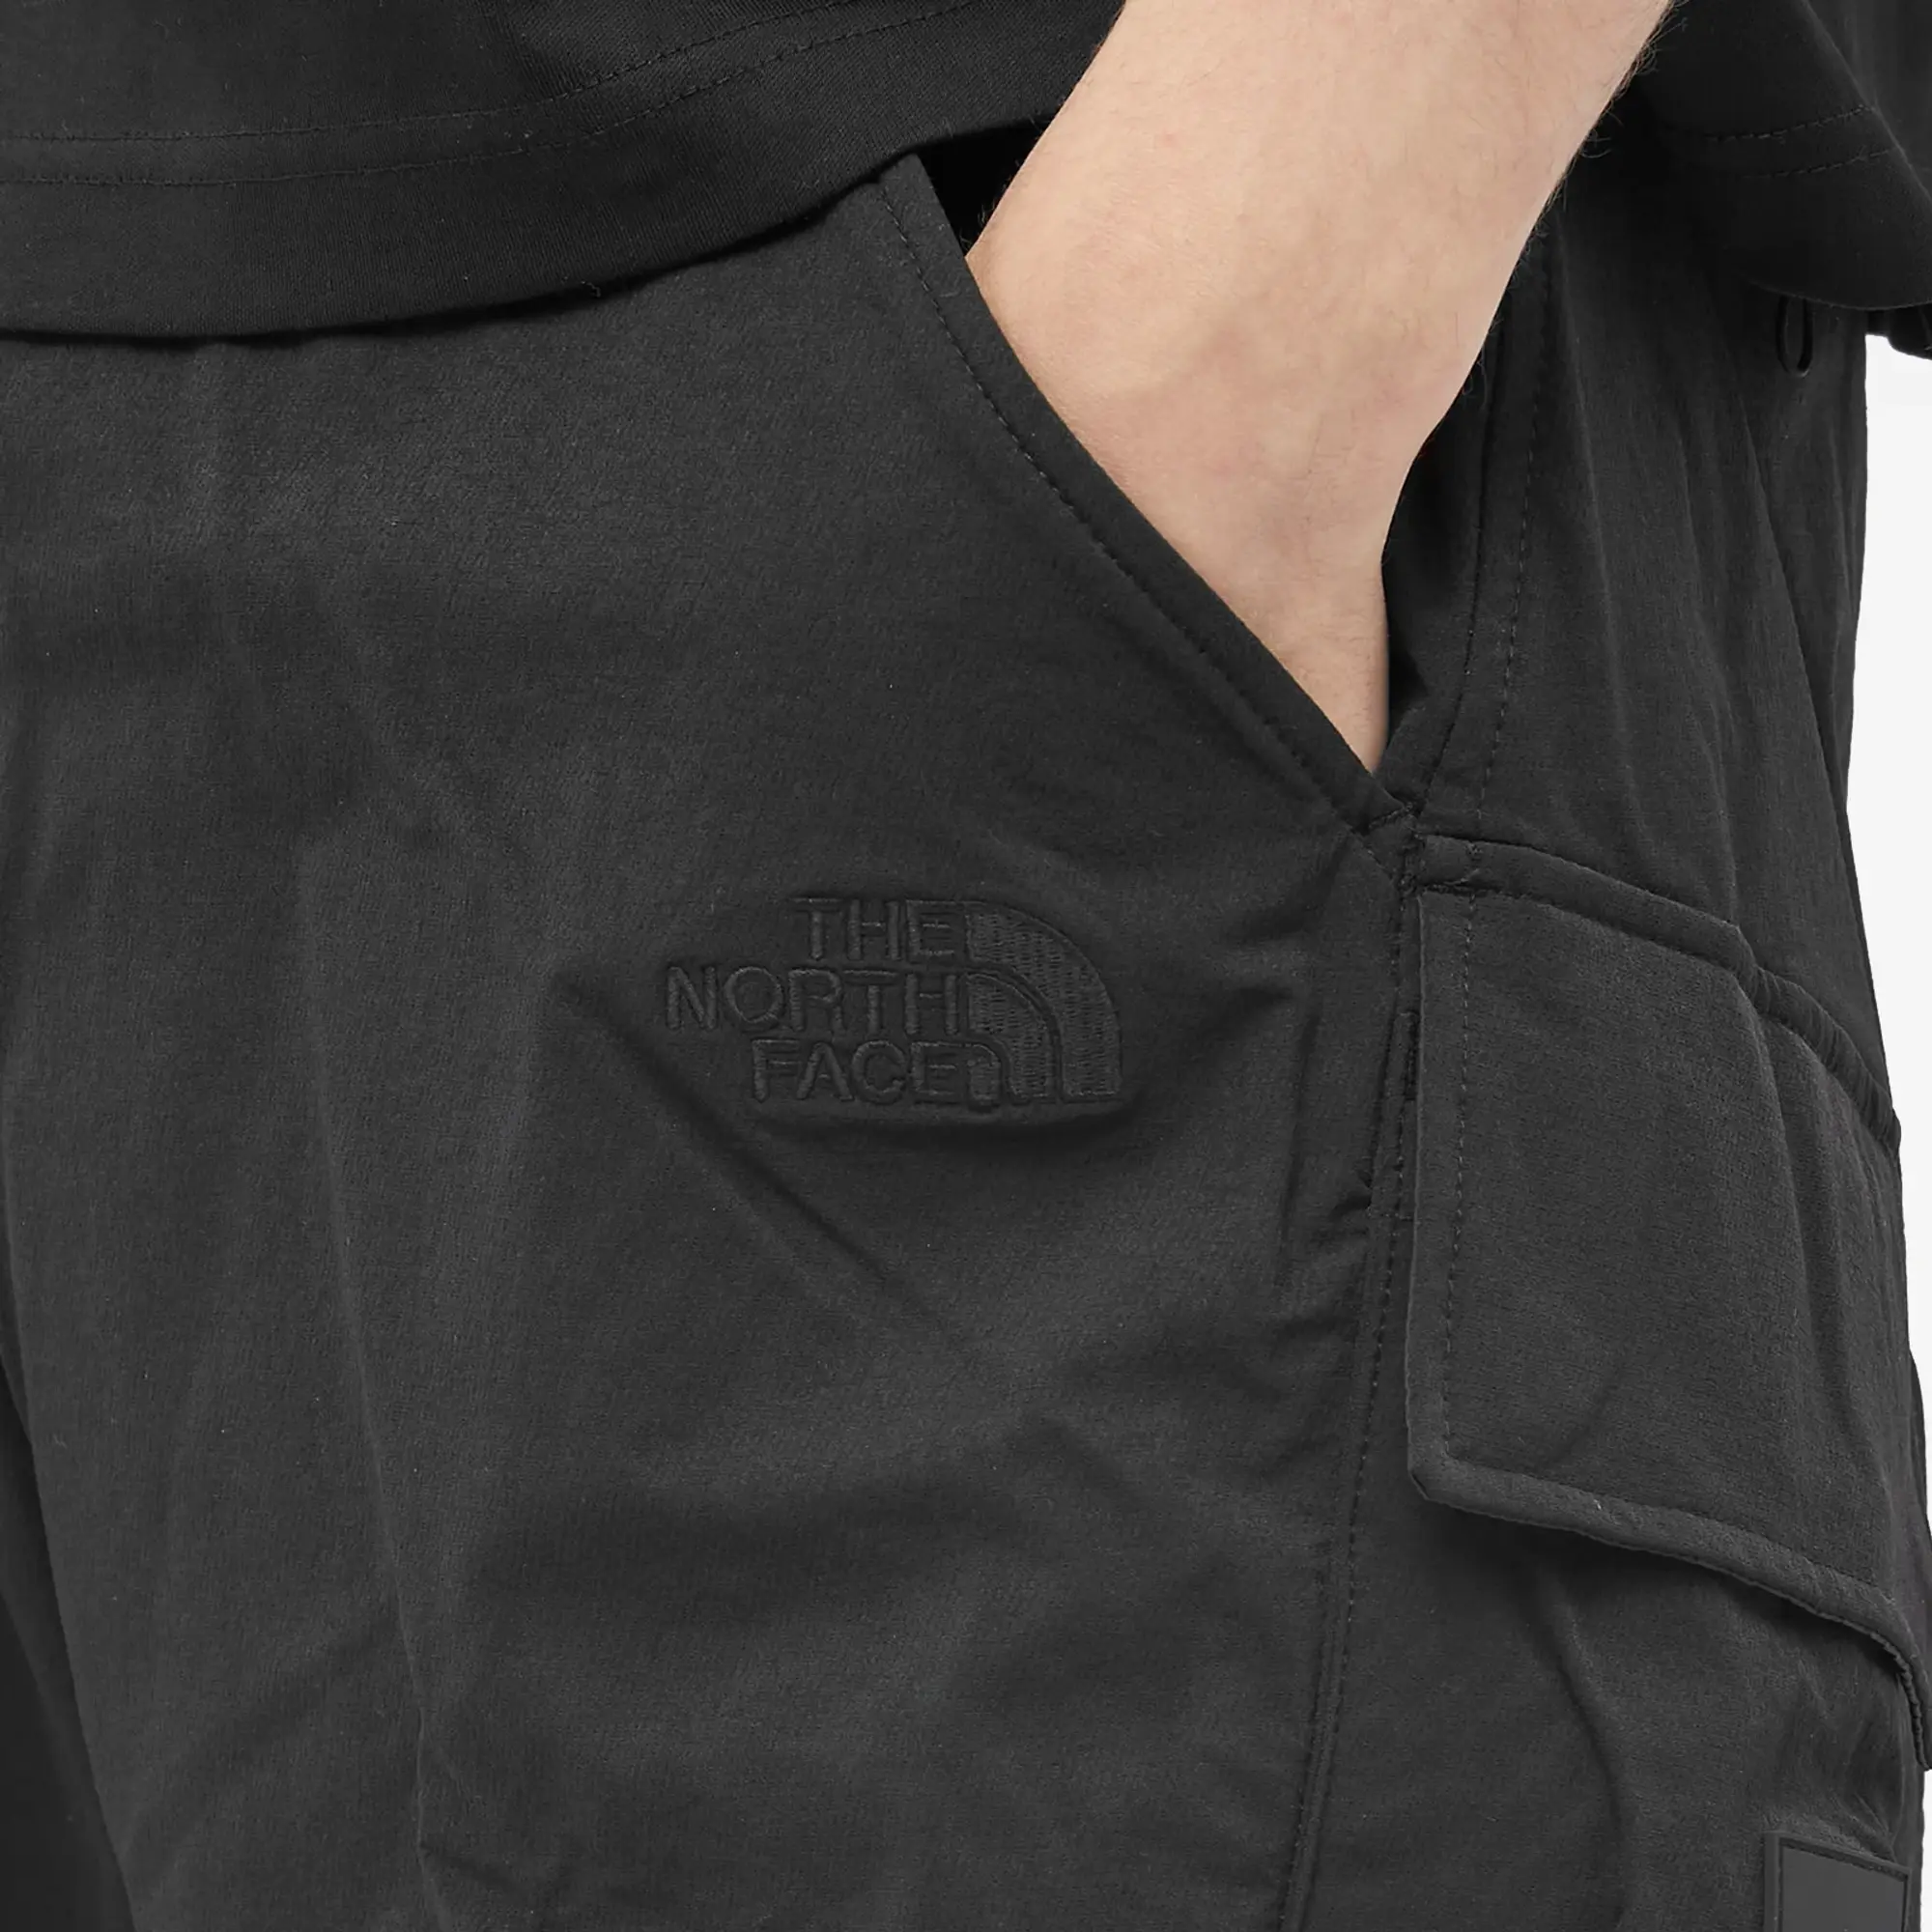 The North Face Black Series The North Face UE Men's Cargo Shorts Tnf Black